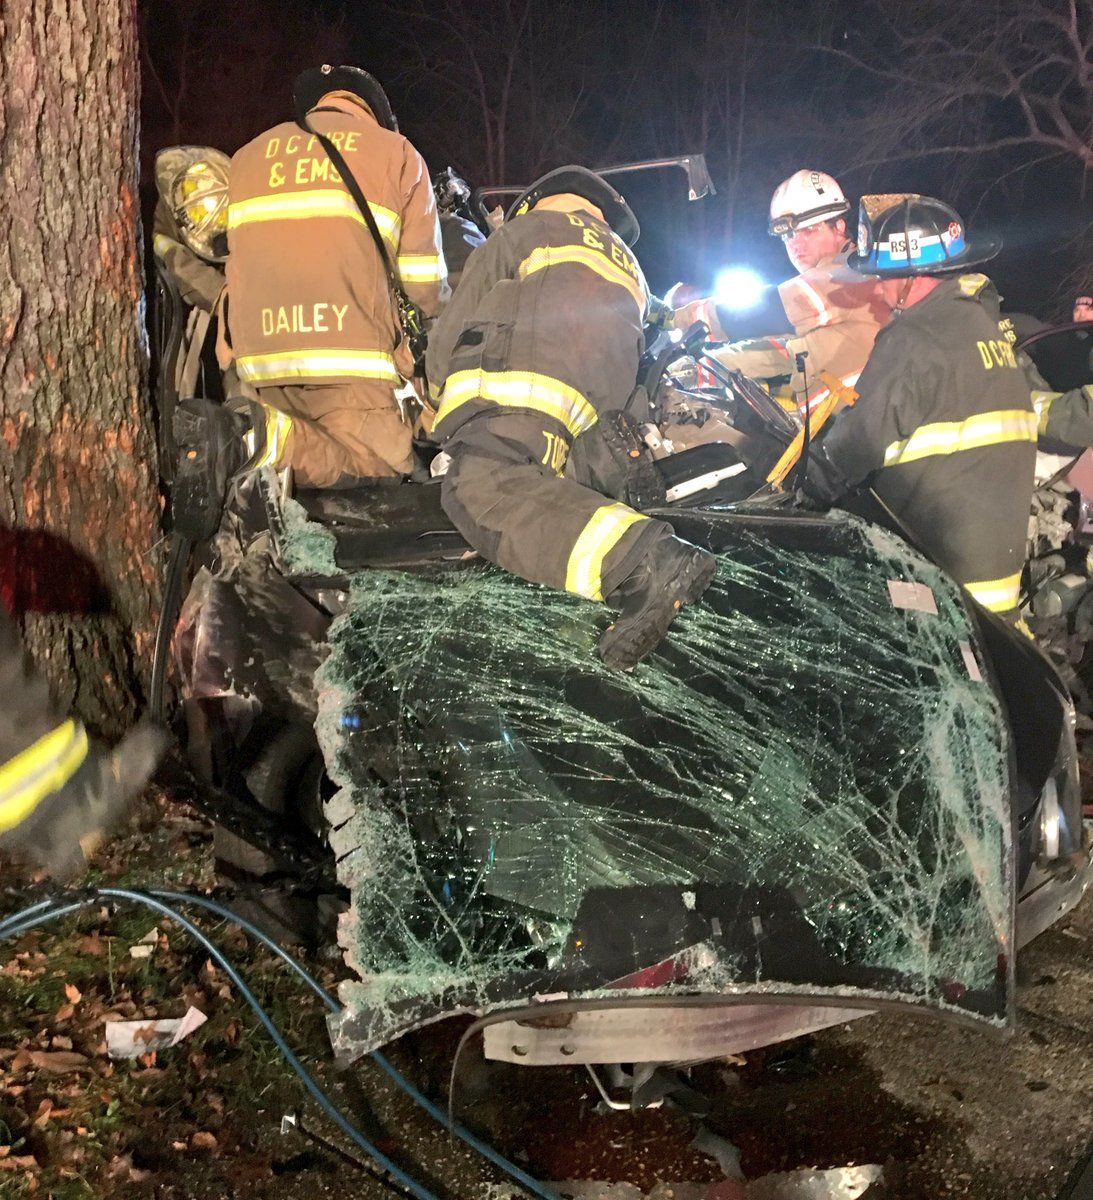 Four people were involved in a serious crash near the National Mall on Sunday, Dec. 12, 2018. One person has died and other was airlifted to the hospital by U.S. Park police.
D.C. Fire and EMS tweeted this photo of emergency responders at the scene. (D.C. Fire and EMS via Twitter)